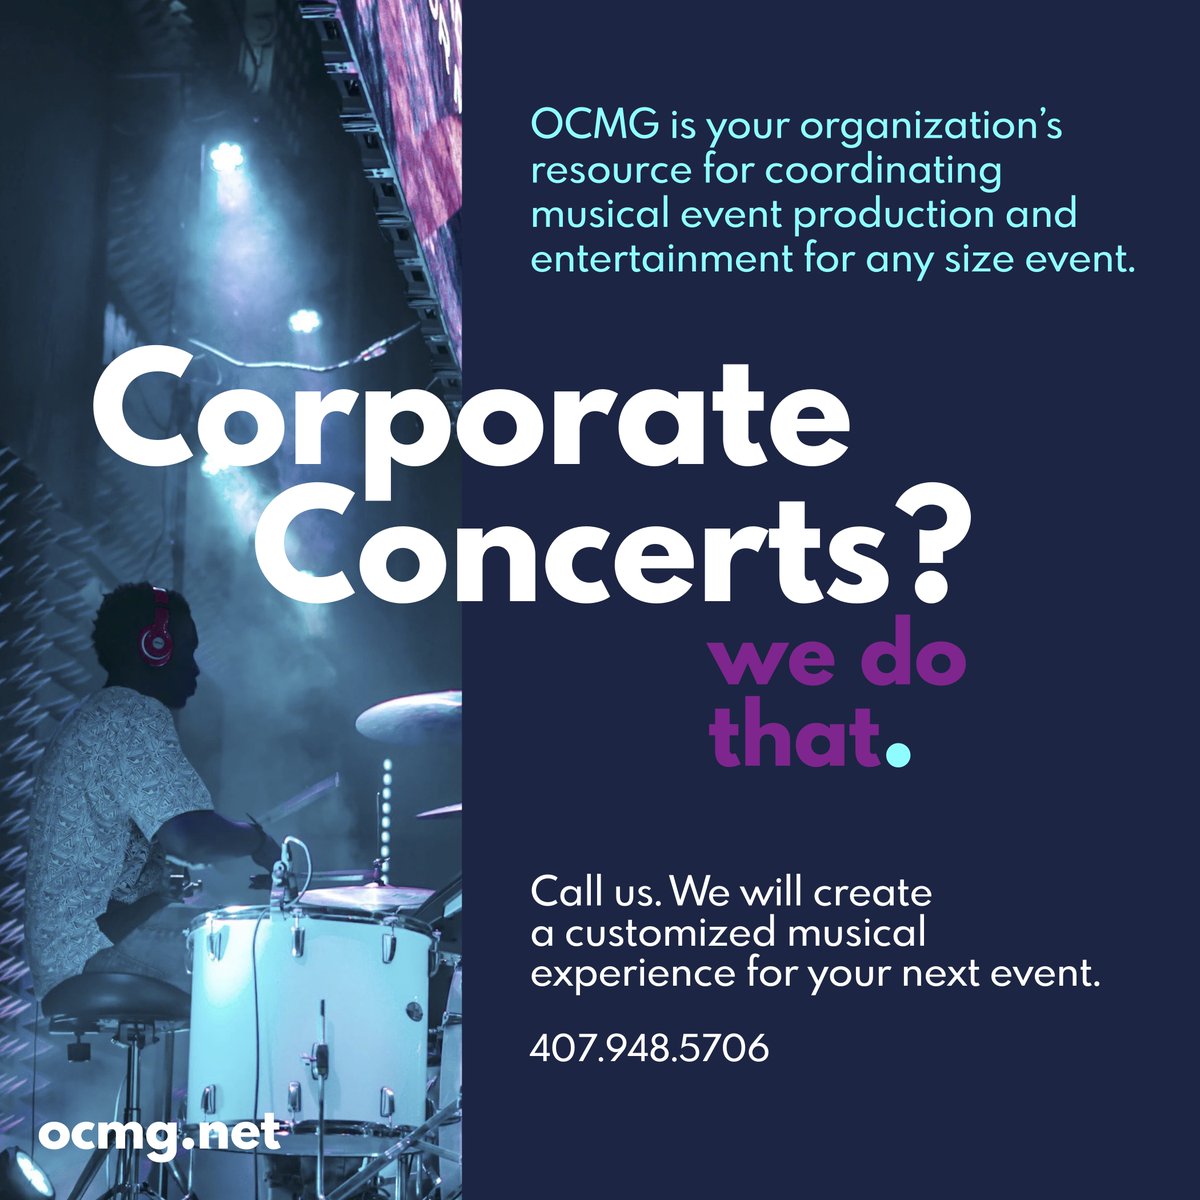 Corporate concerts? We do that. Call 407-948-5706 or visit buff.ly/34NqqjM

#concerts #corporateconcerts #corporateconcert #music #musicfestival #companyconcert  #connectmeetings #mpi #ocmg #ocmgevents #orlando #orlandoFL #eventsprofs #events #orlandoeventplanner